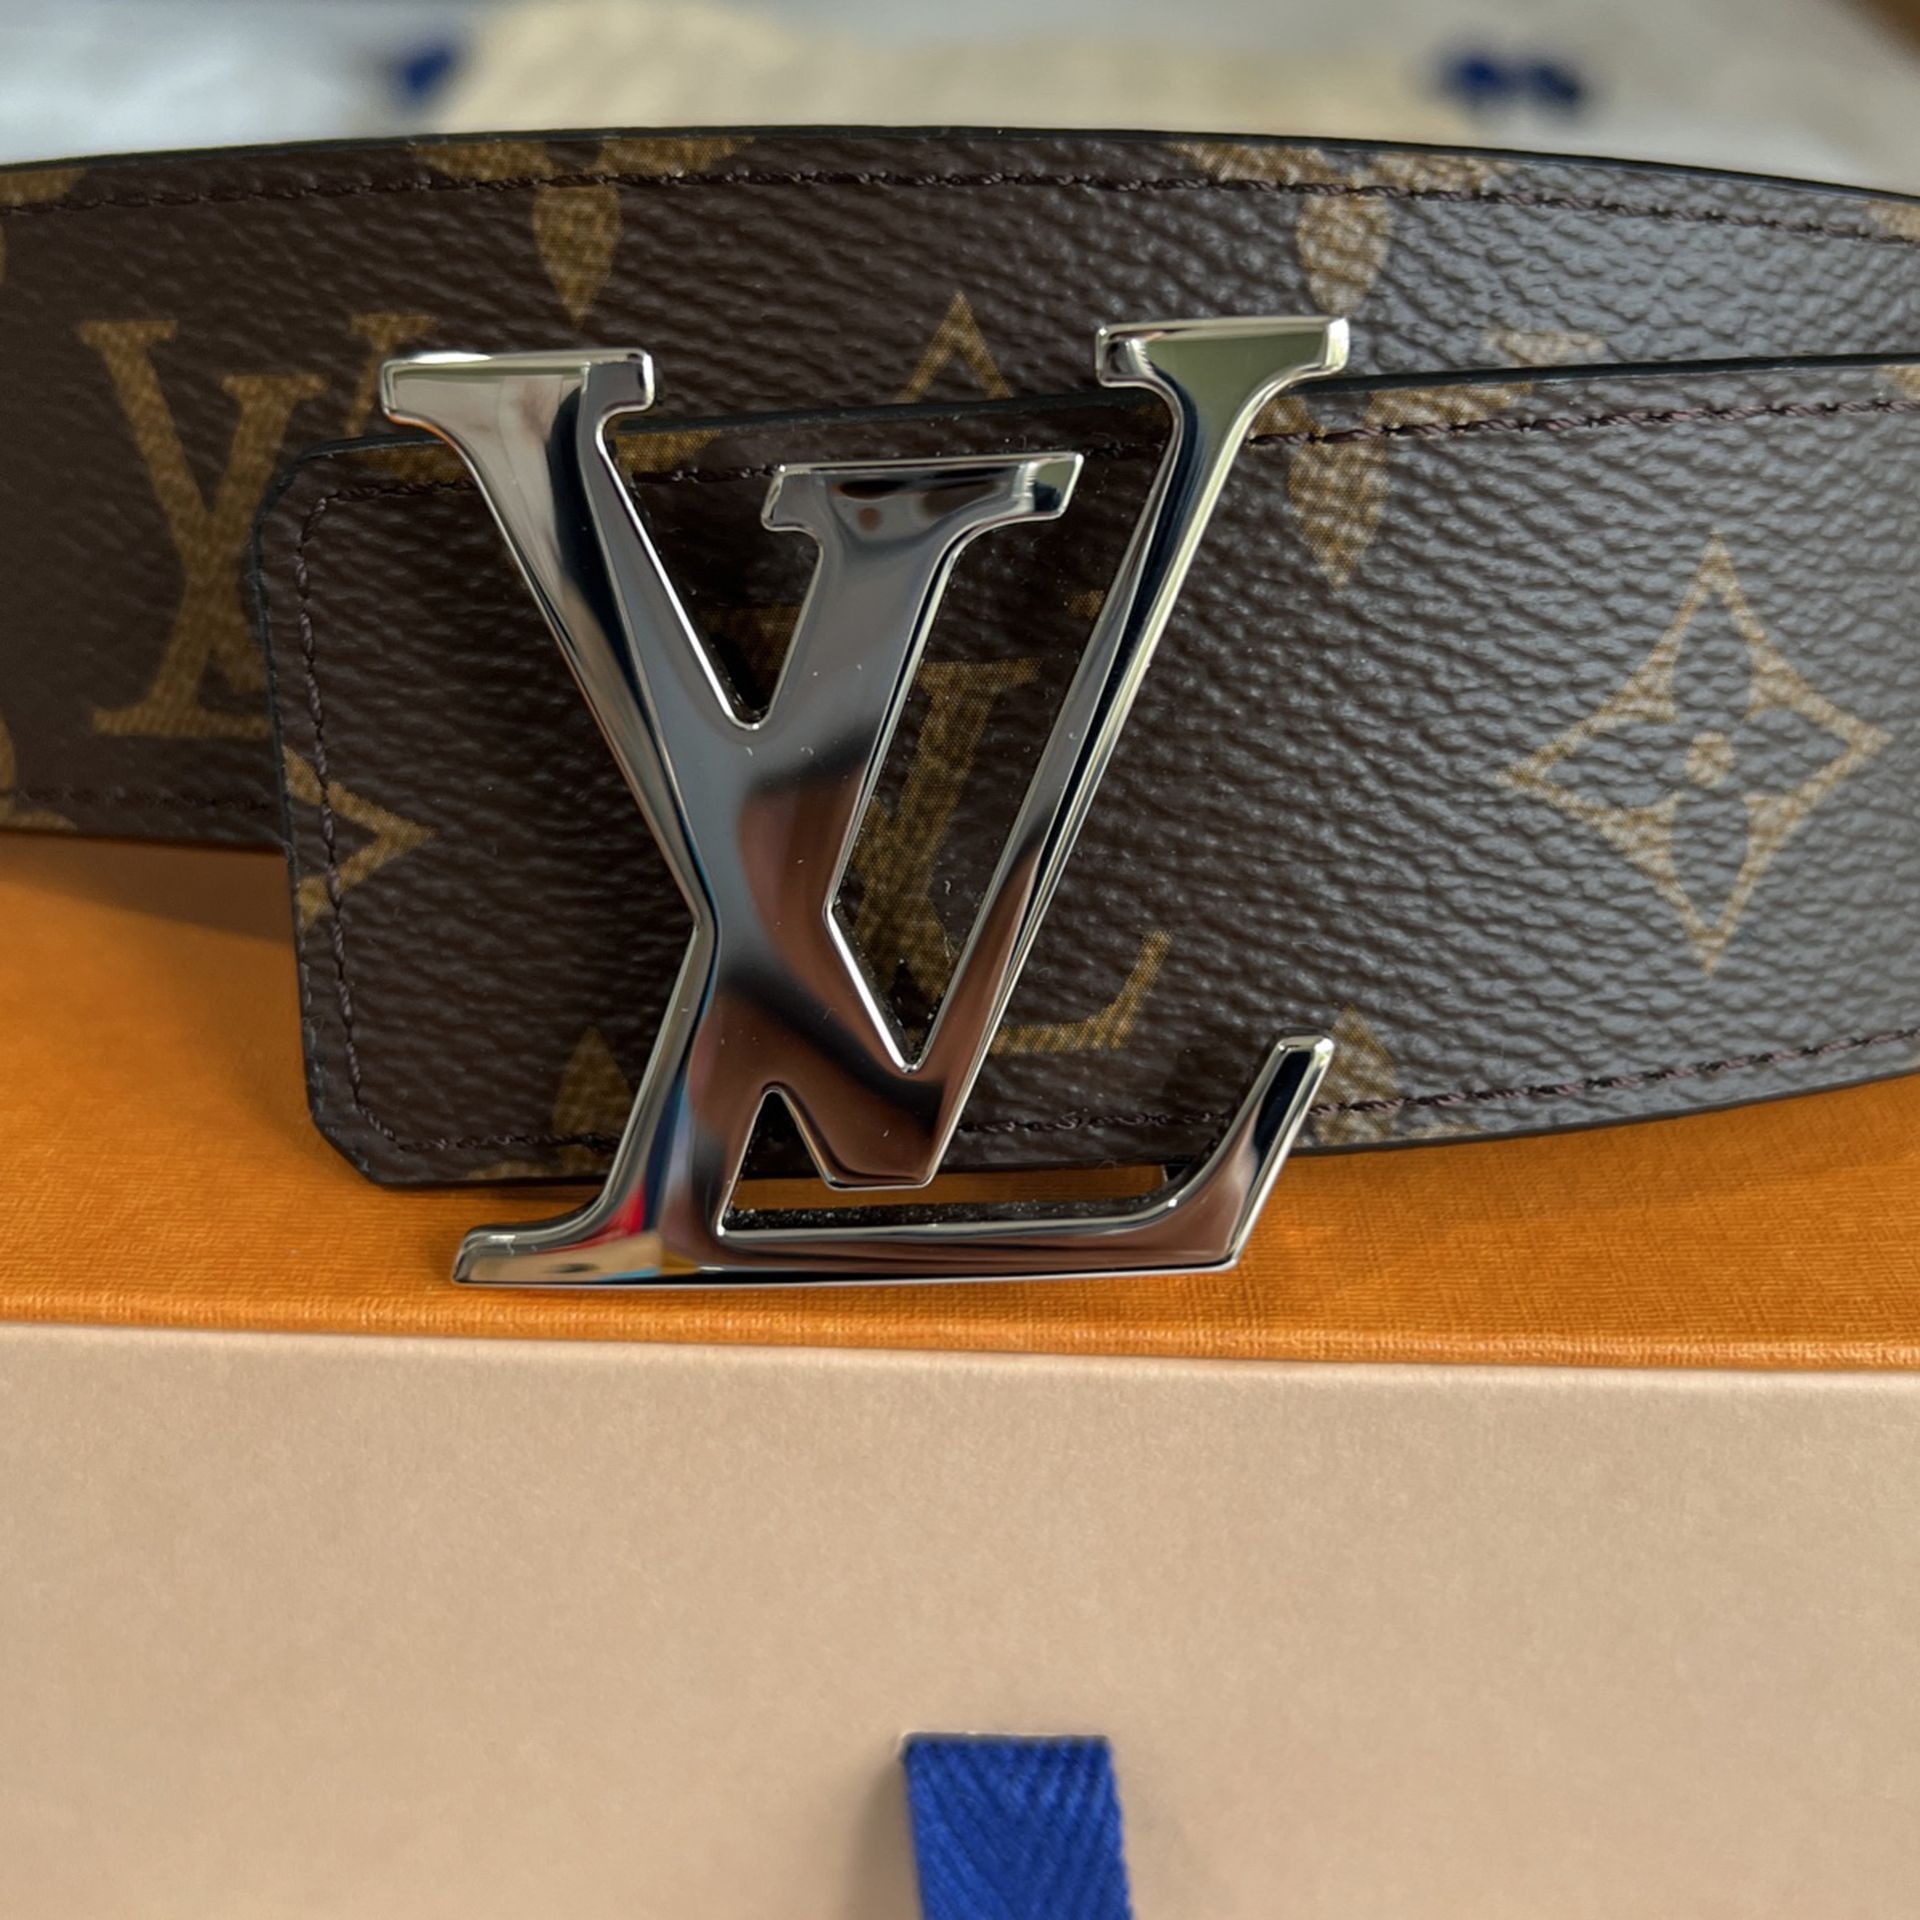 Men's Louis Vuitton Belt Size 90/36 for Sale in Baltimore, MD